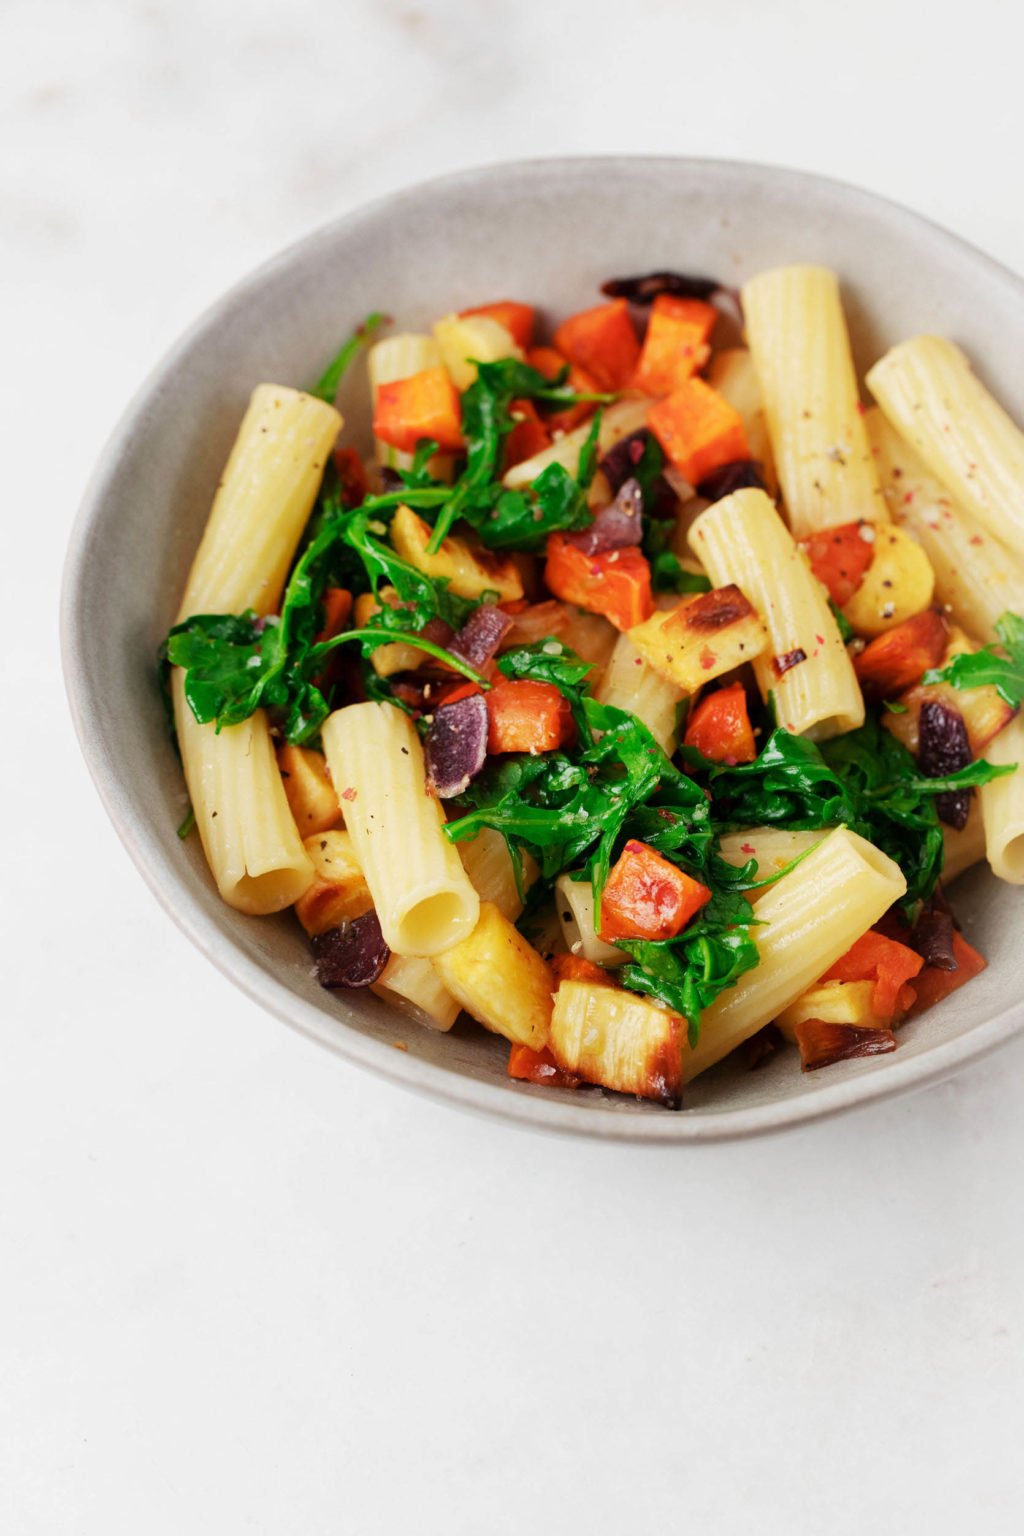 A colorful mix of rigatoni, arugula, and carrots is served in a gray ceramic bowl.